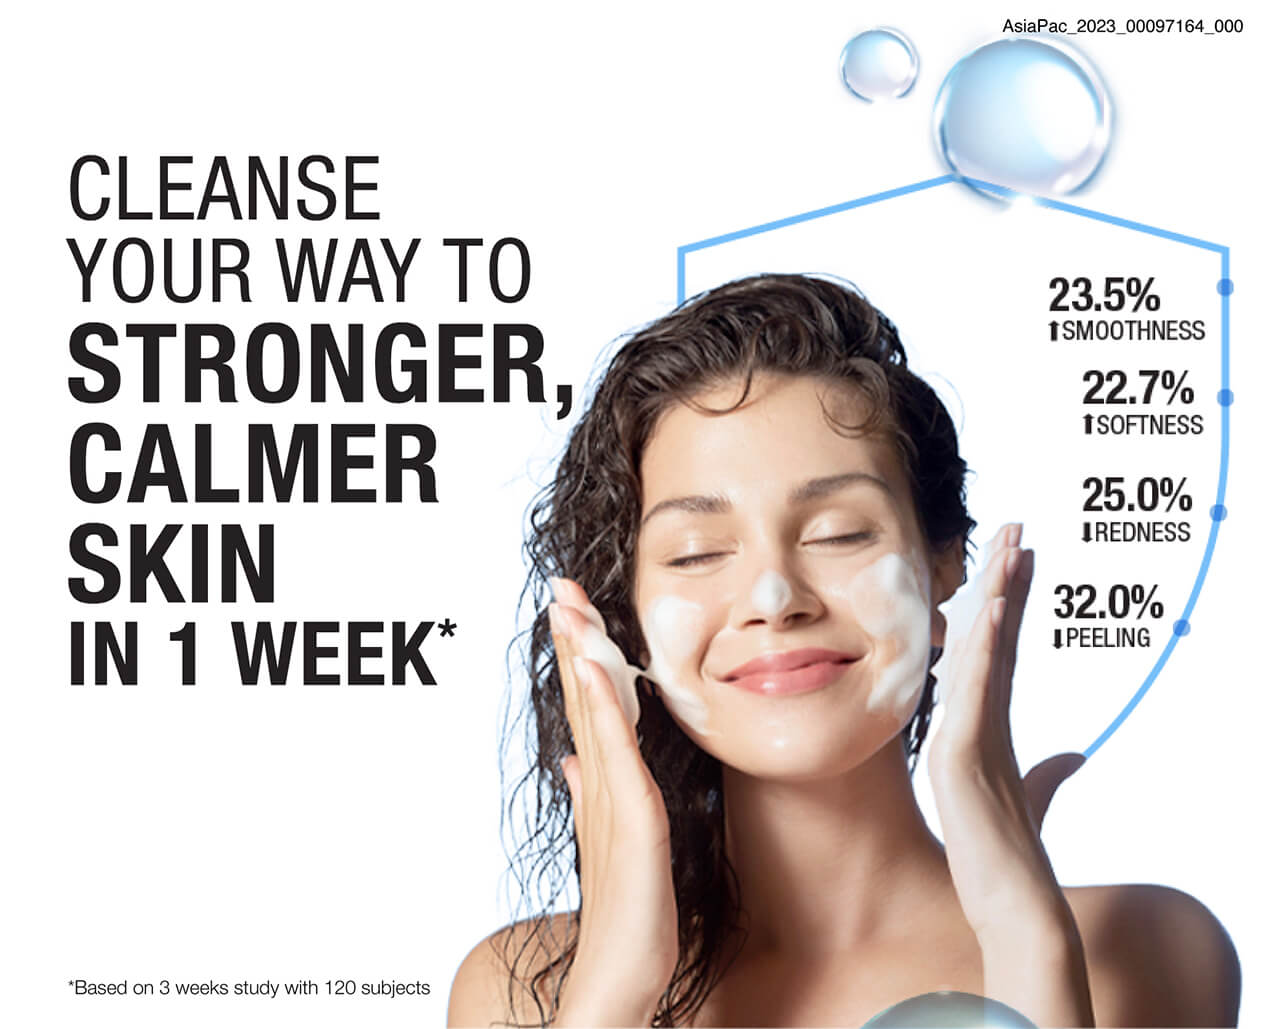 CLEANSE YOUR WAY TO STRONGER, CALMER SKIN IN 1 WEEK*  23.5% SMOOTHNESS 22.7% SOFTNESS 25.0% REDNESS 32.0% PEELING